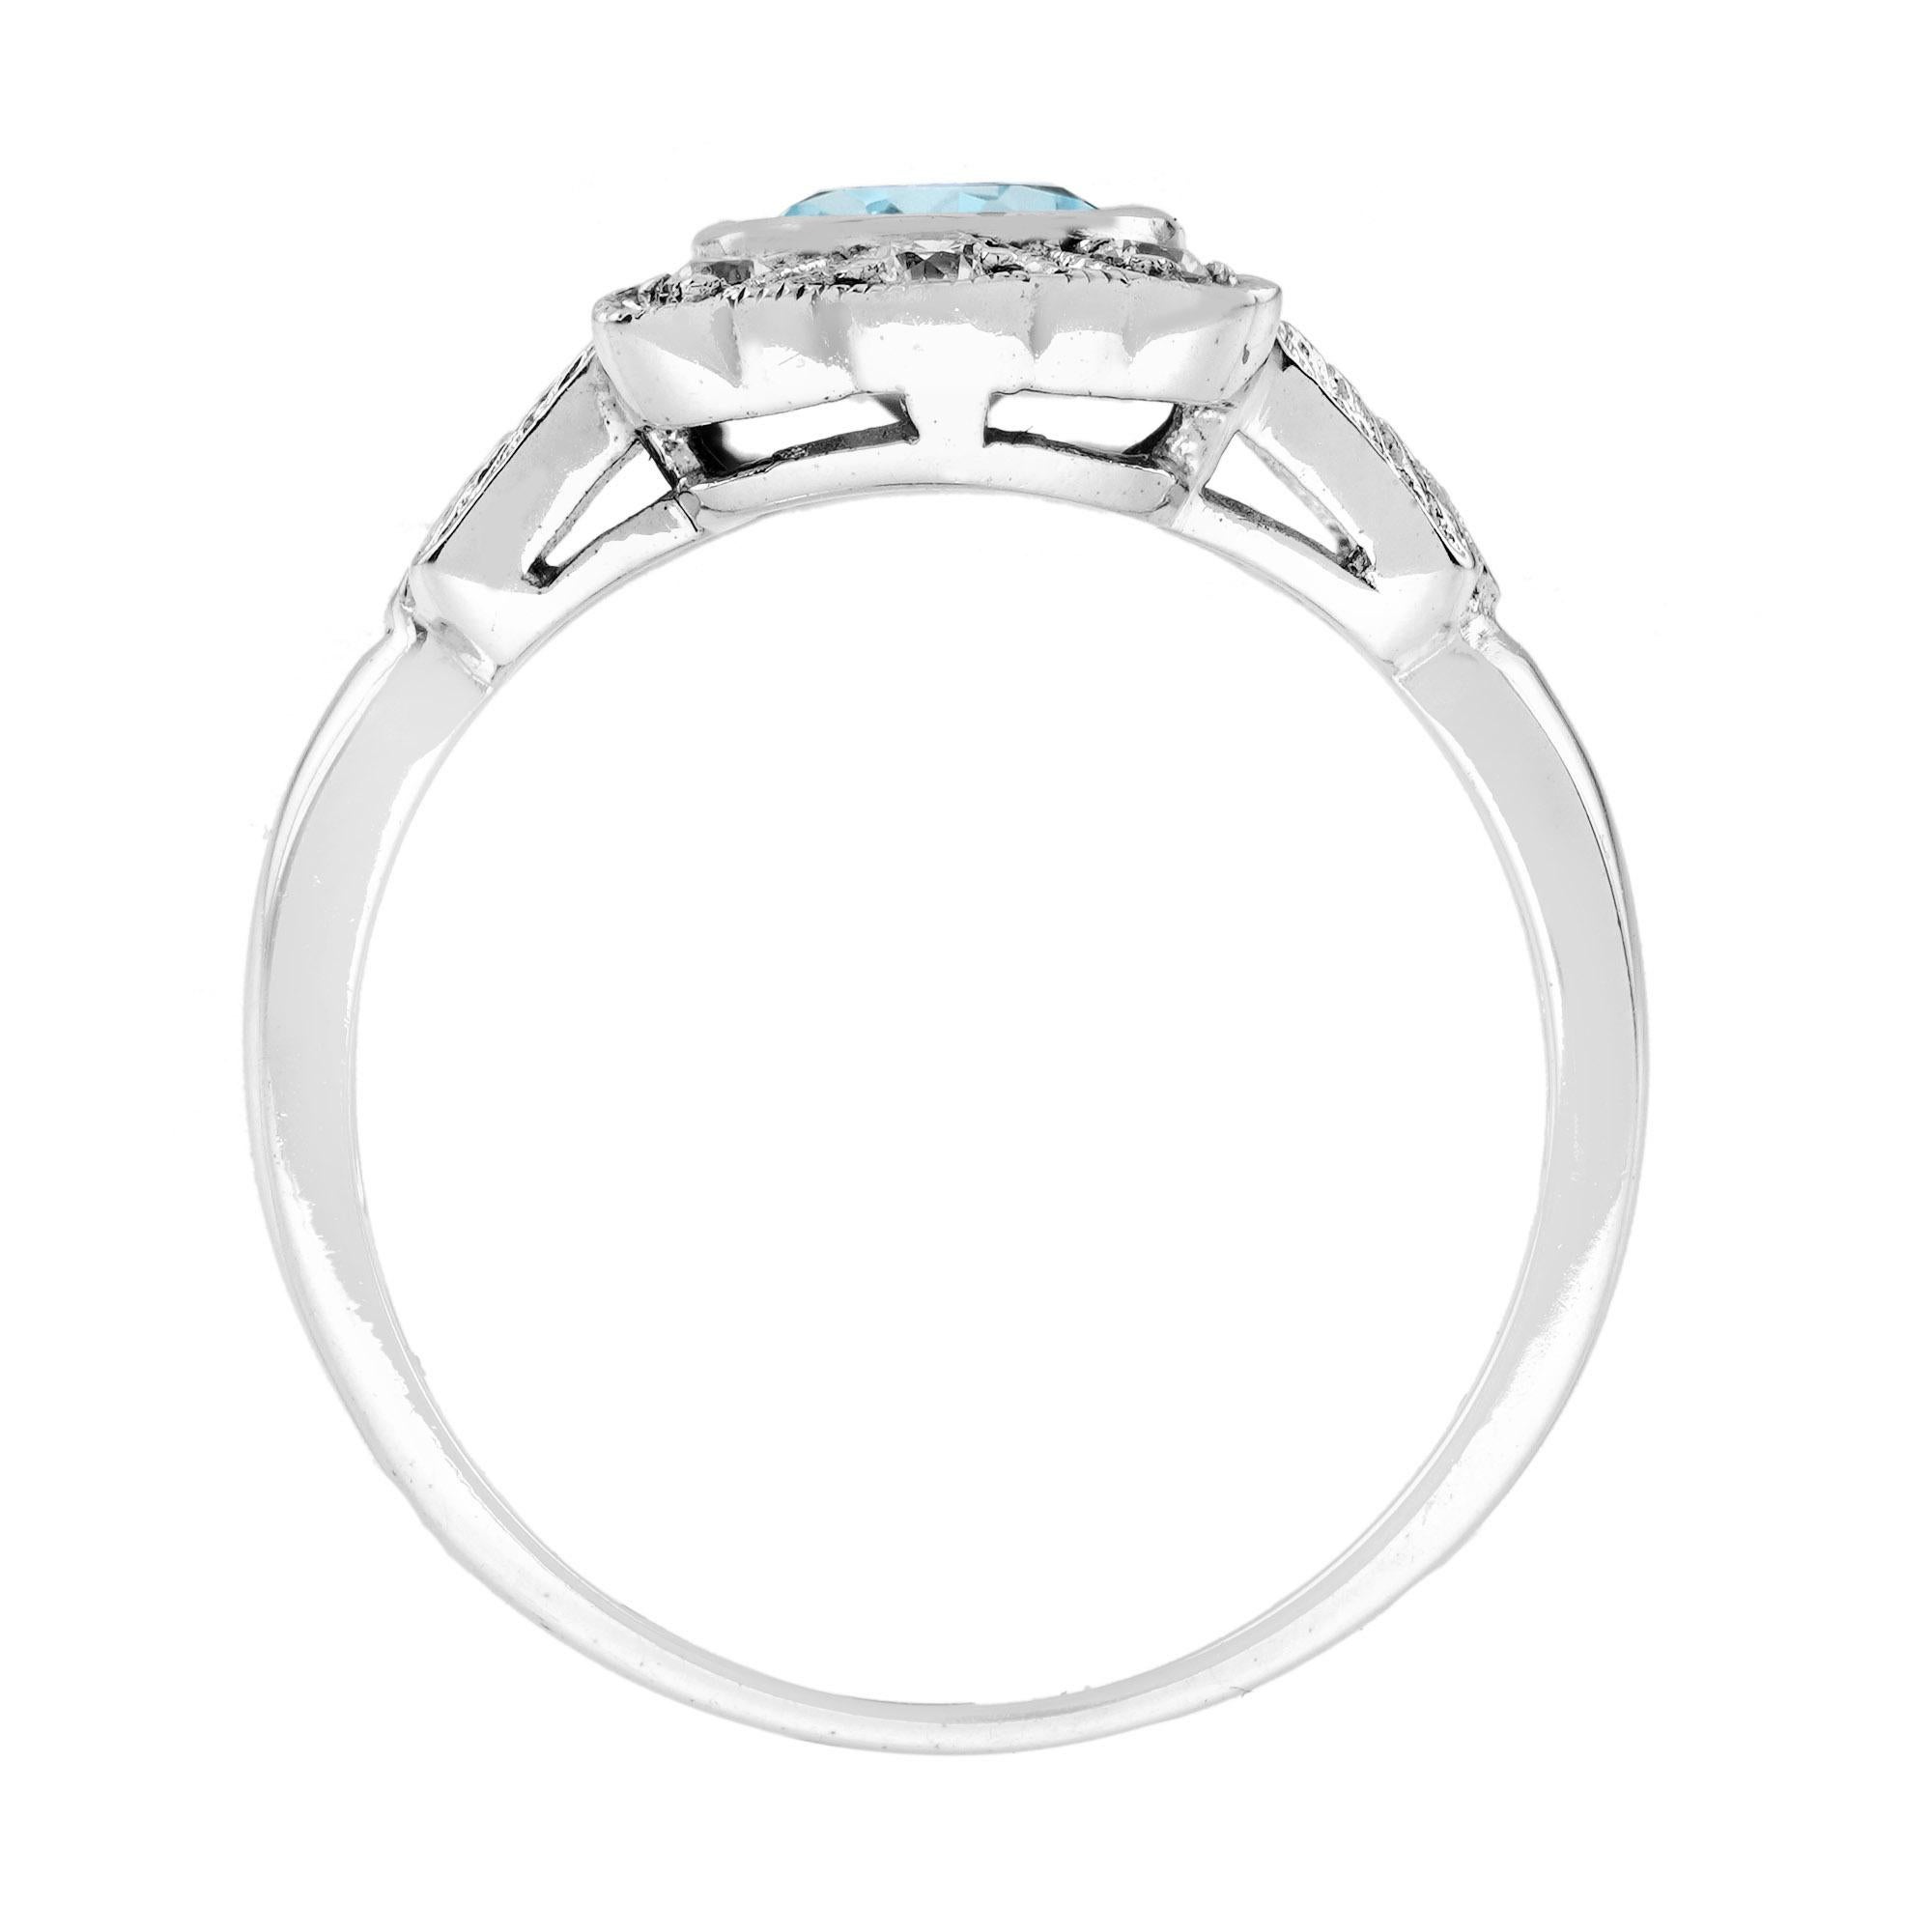 1.5 Ct. Aquamarine and Diamond Art Deco Style Engagement Ring in 14K White Gold For Sale 1